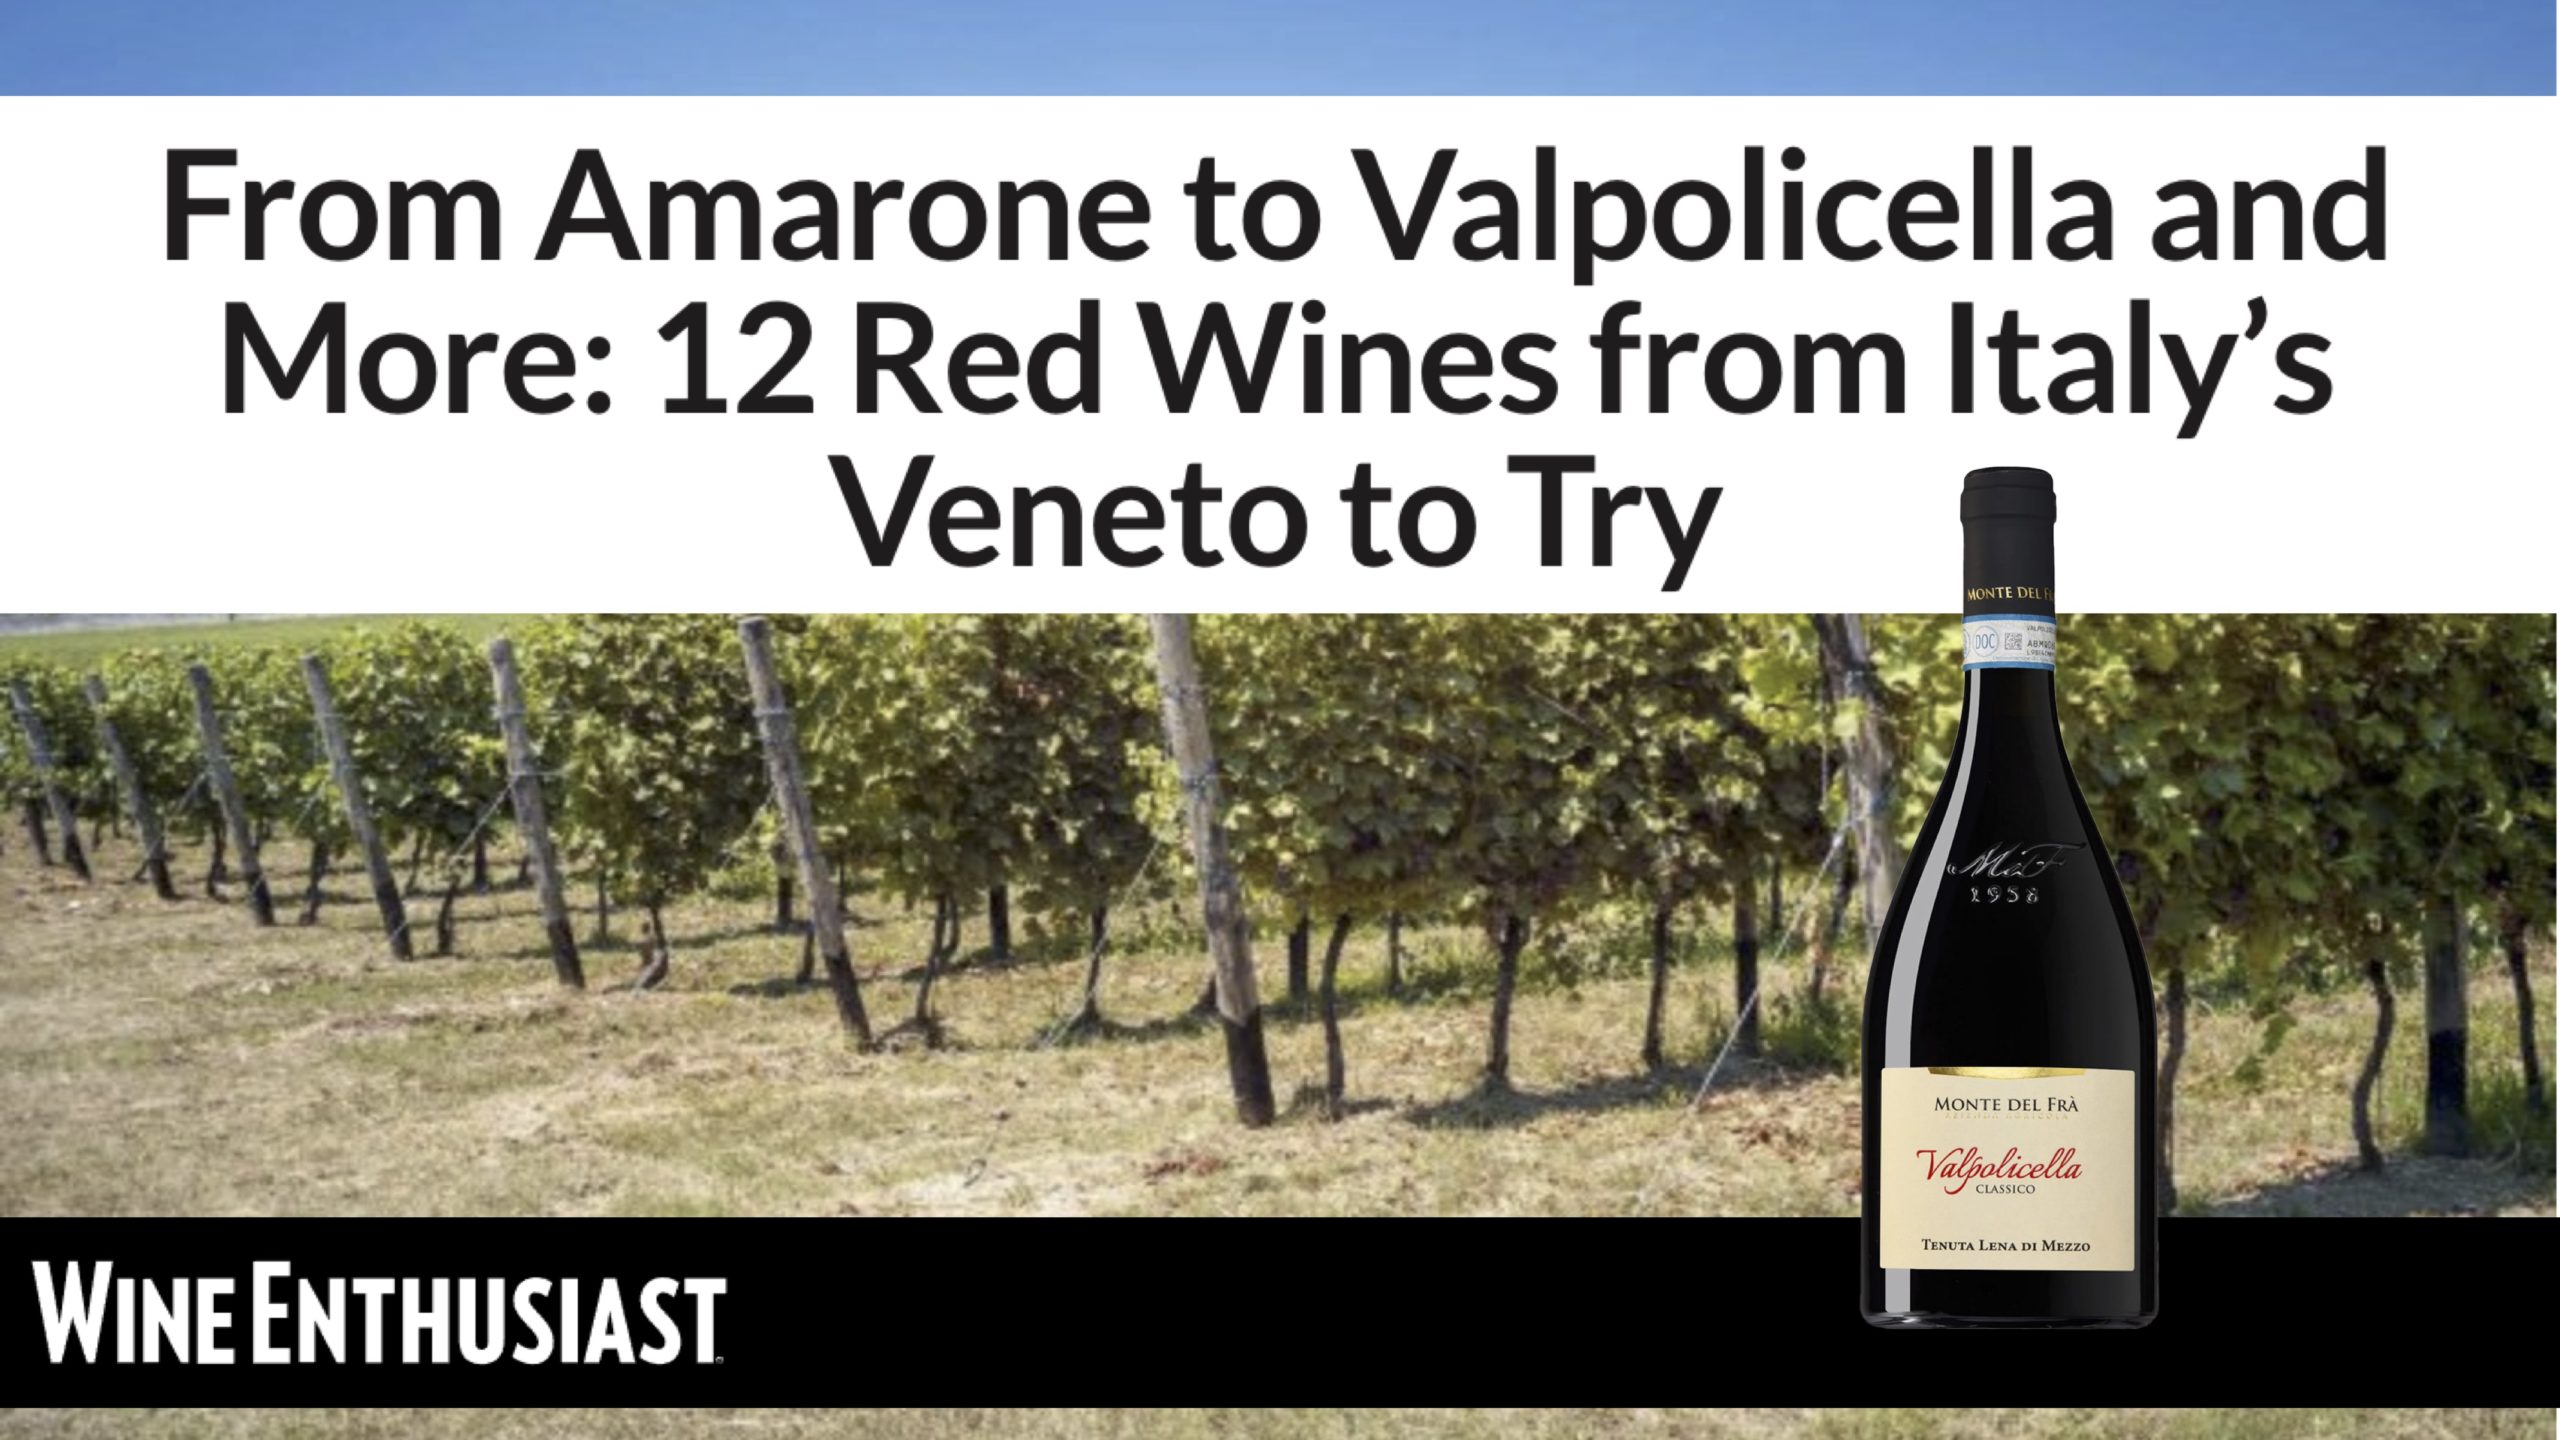 From Amarone to Valpolicella and More: 12 Red Wines from Italy’s Veneto to Try